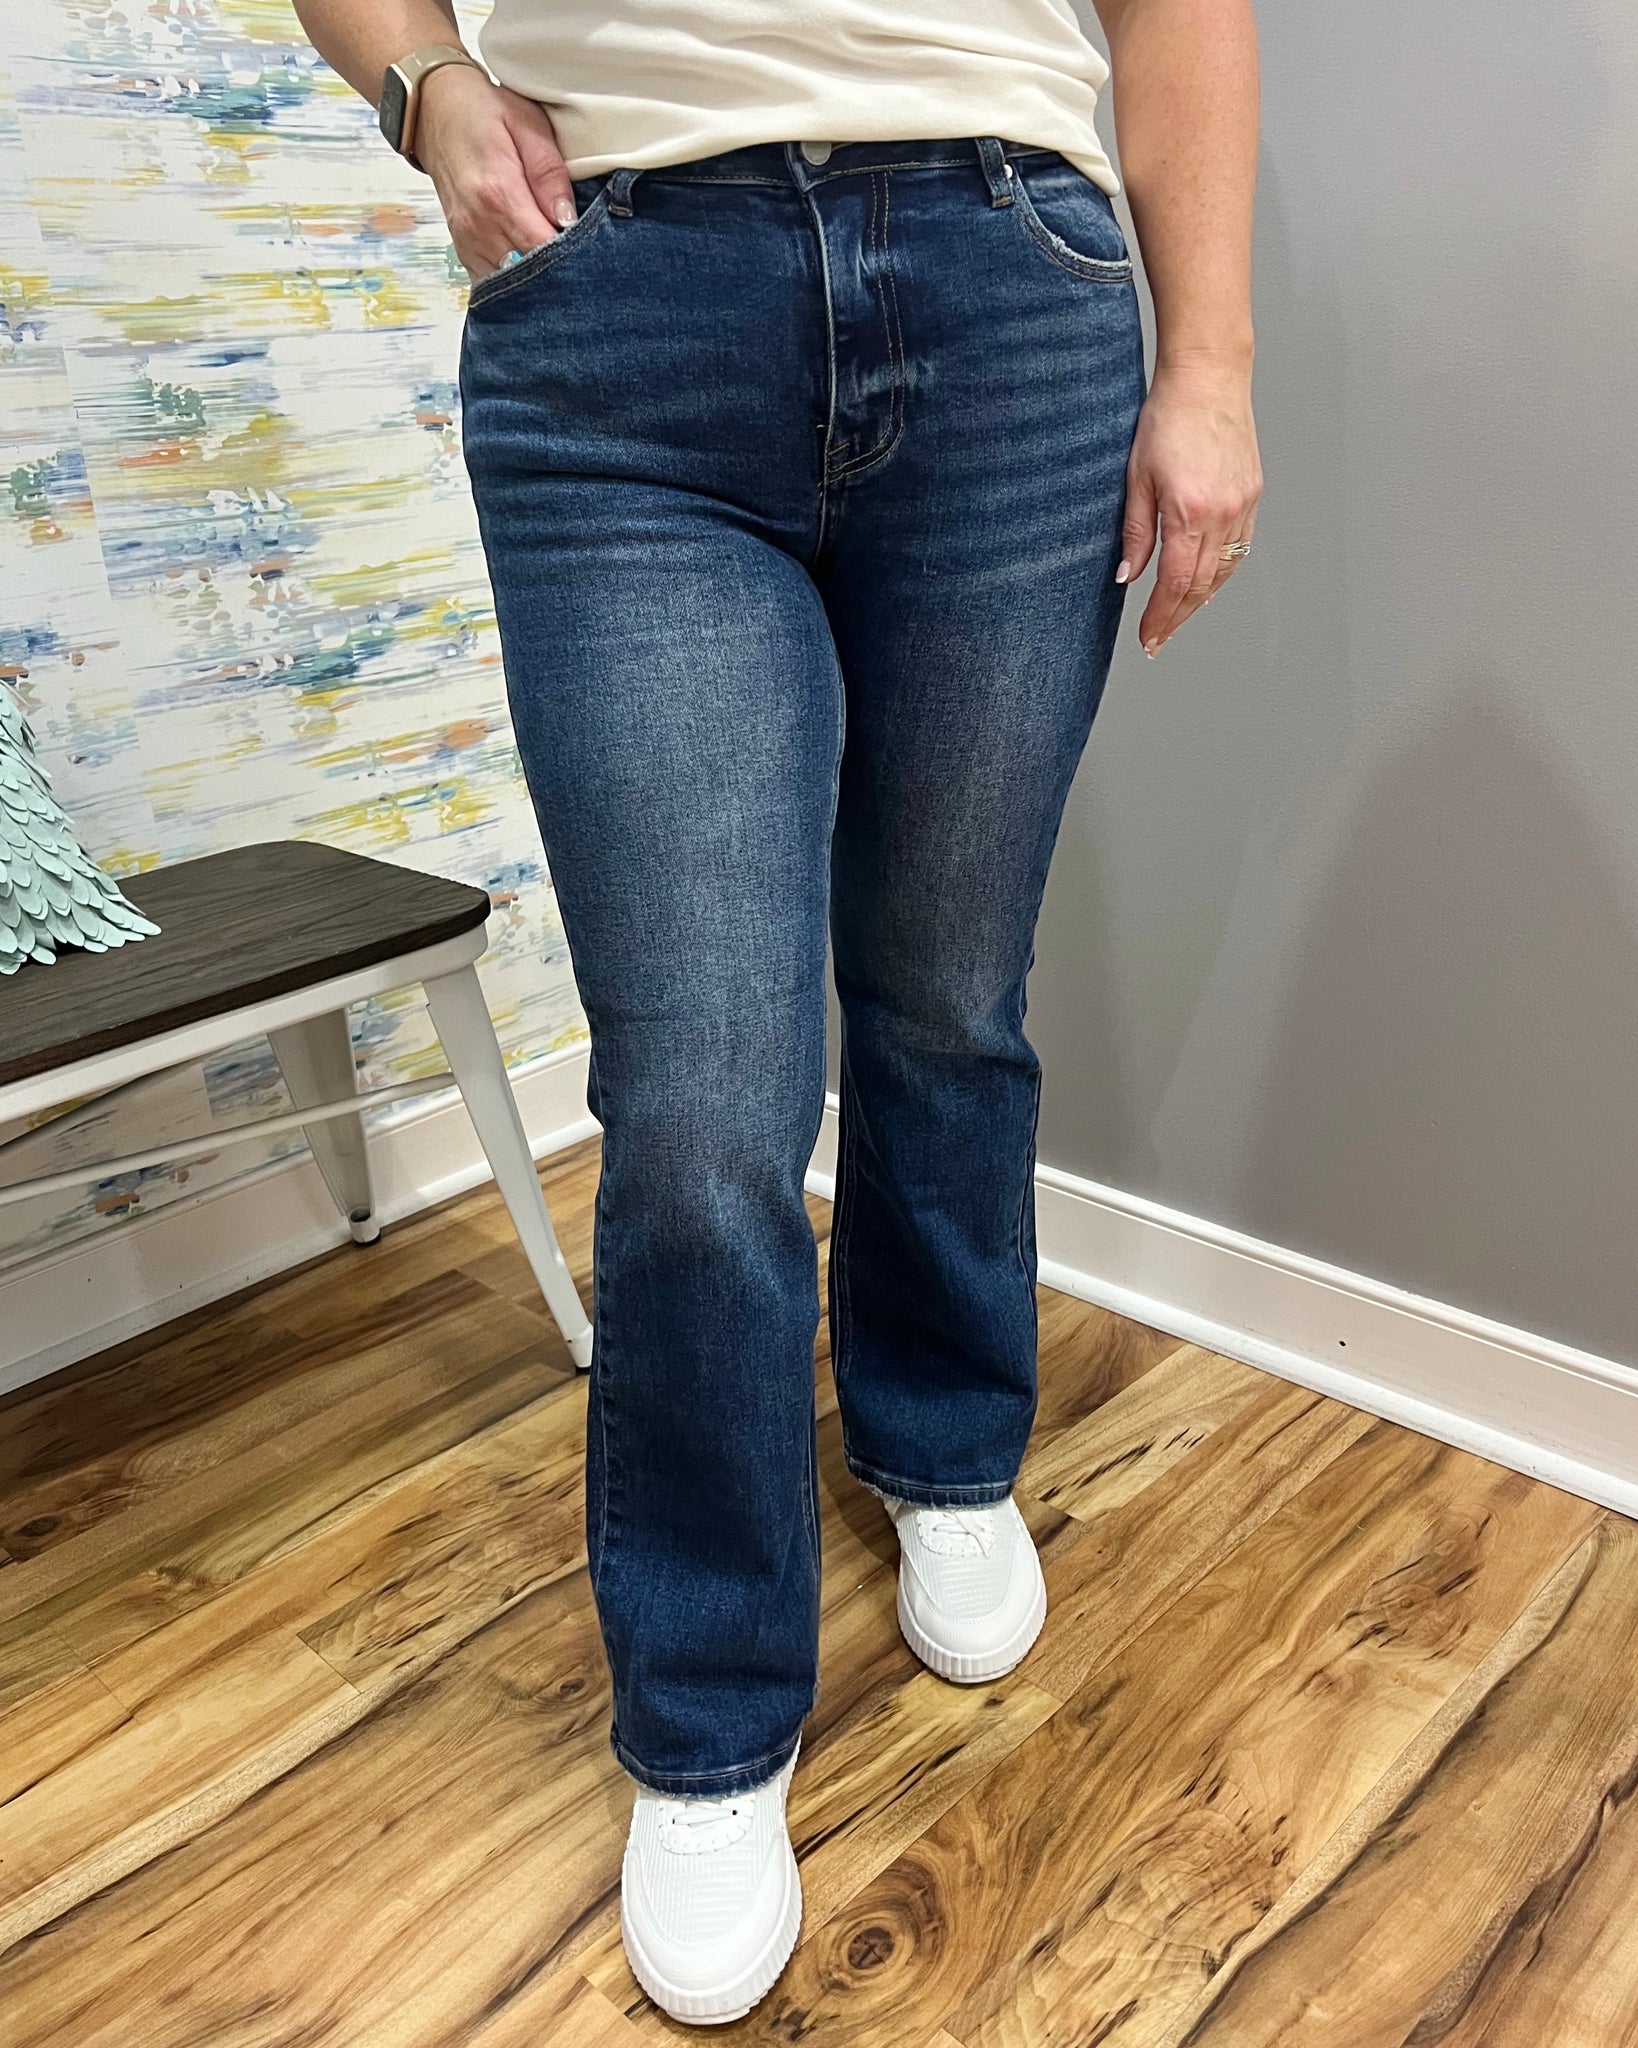 Risen REG/CURVY Mid Rise Relaxed Bootcut Jeans